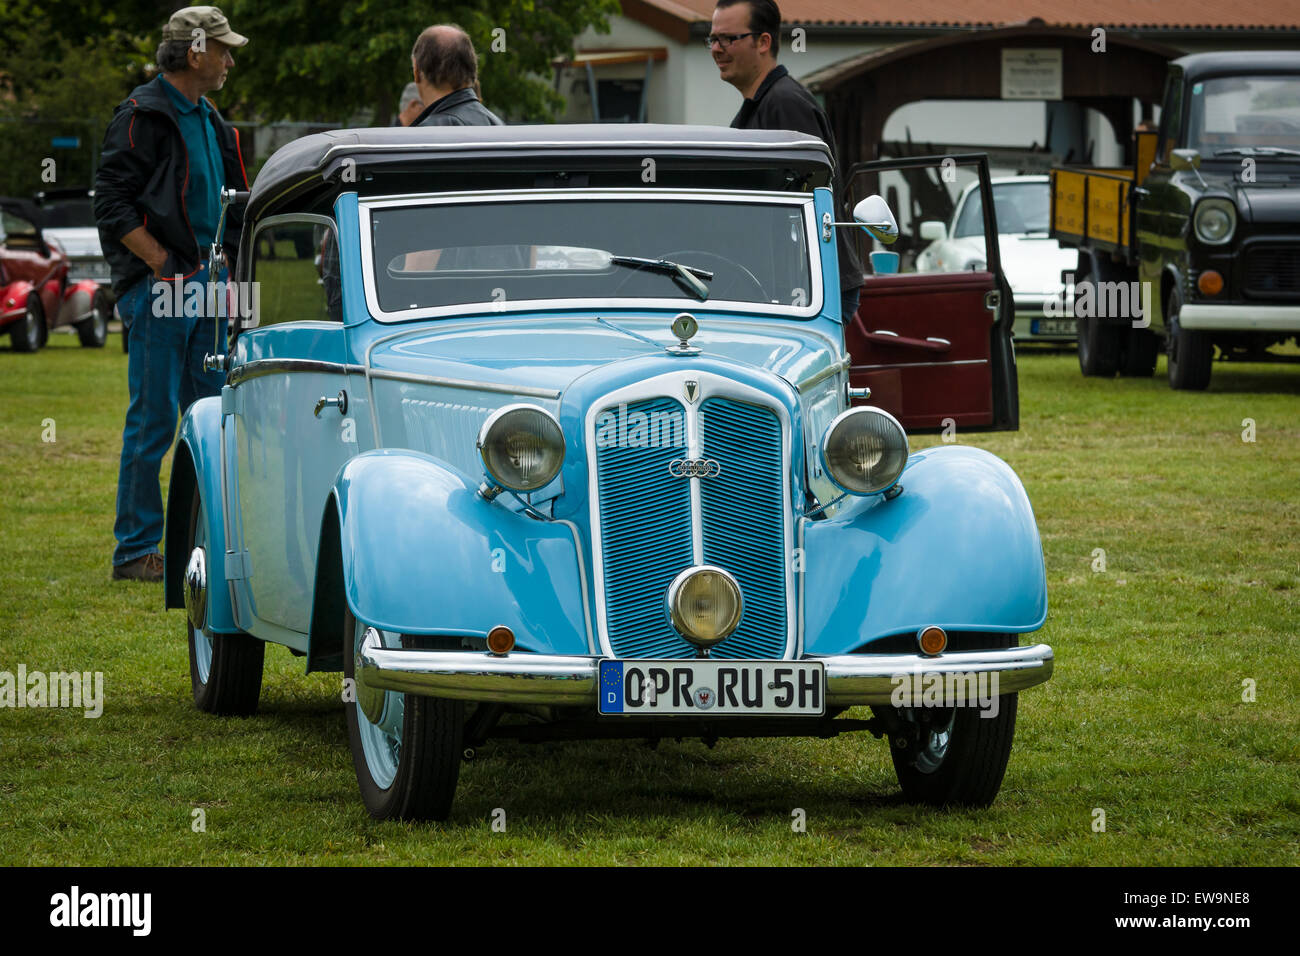 PAAREN IM GLIEN, GERMANY - MAY 23, 2015: Vintage car DKW F7. The oldtimer show in MAFZ. Stock Photo